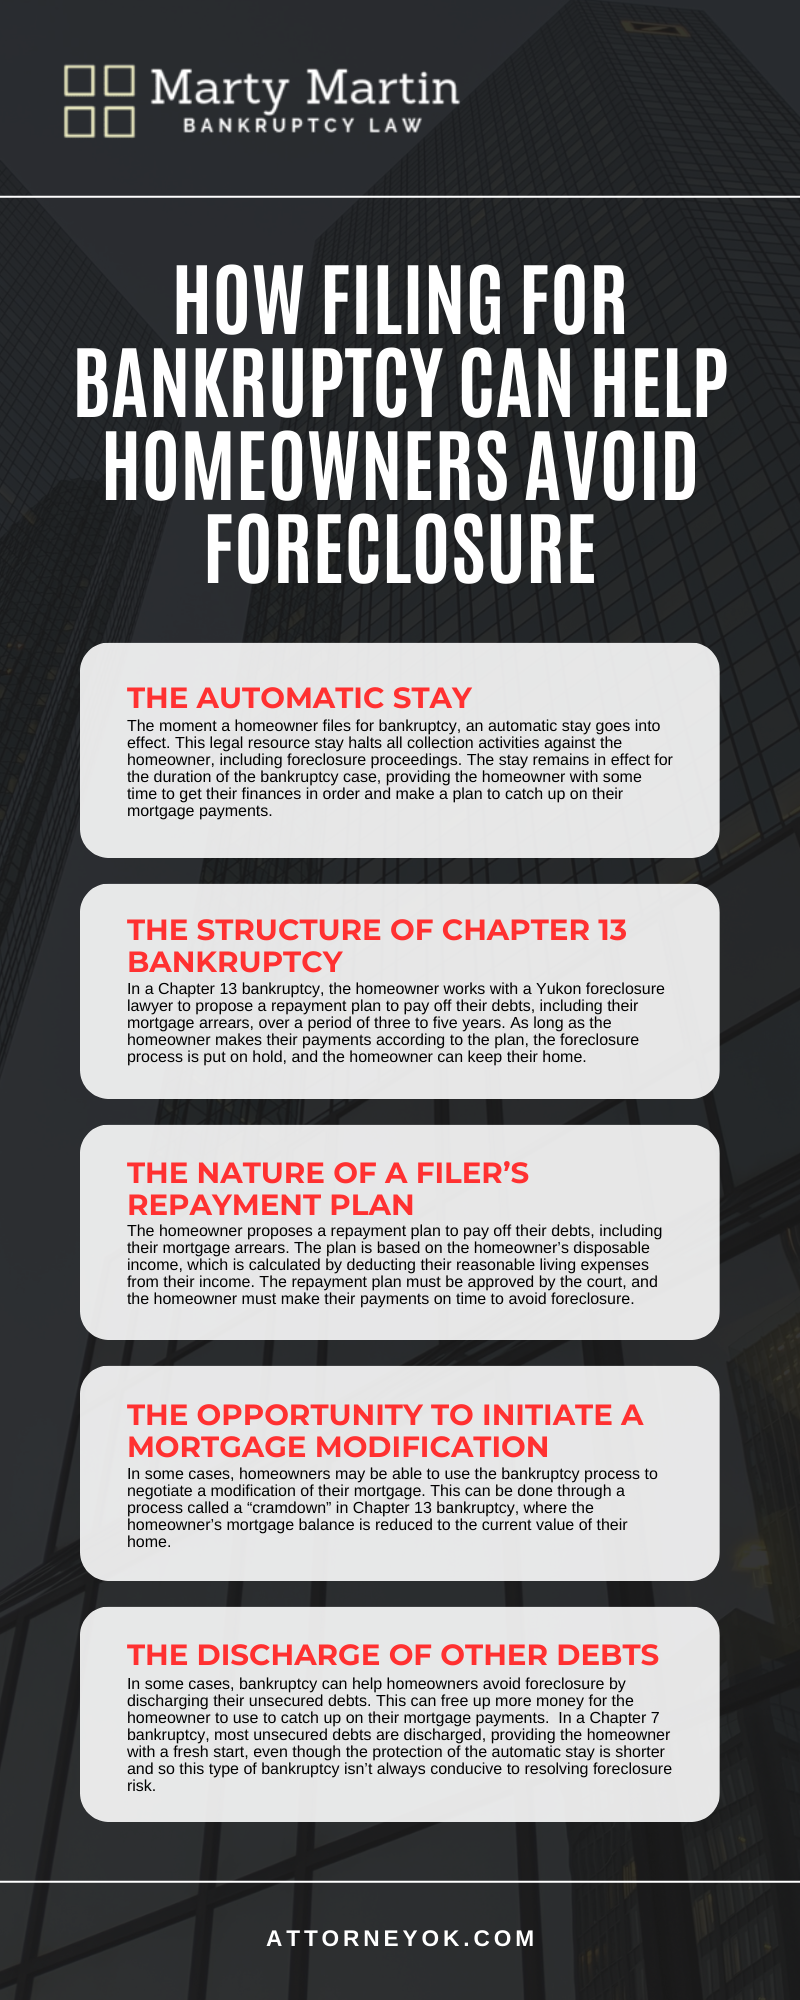 How Filing For Bankruptcy Can Help Homeowners Avoid Foreclosure Infographic